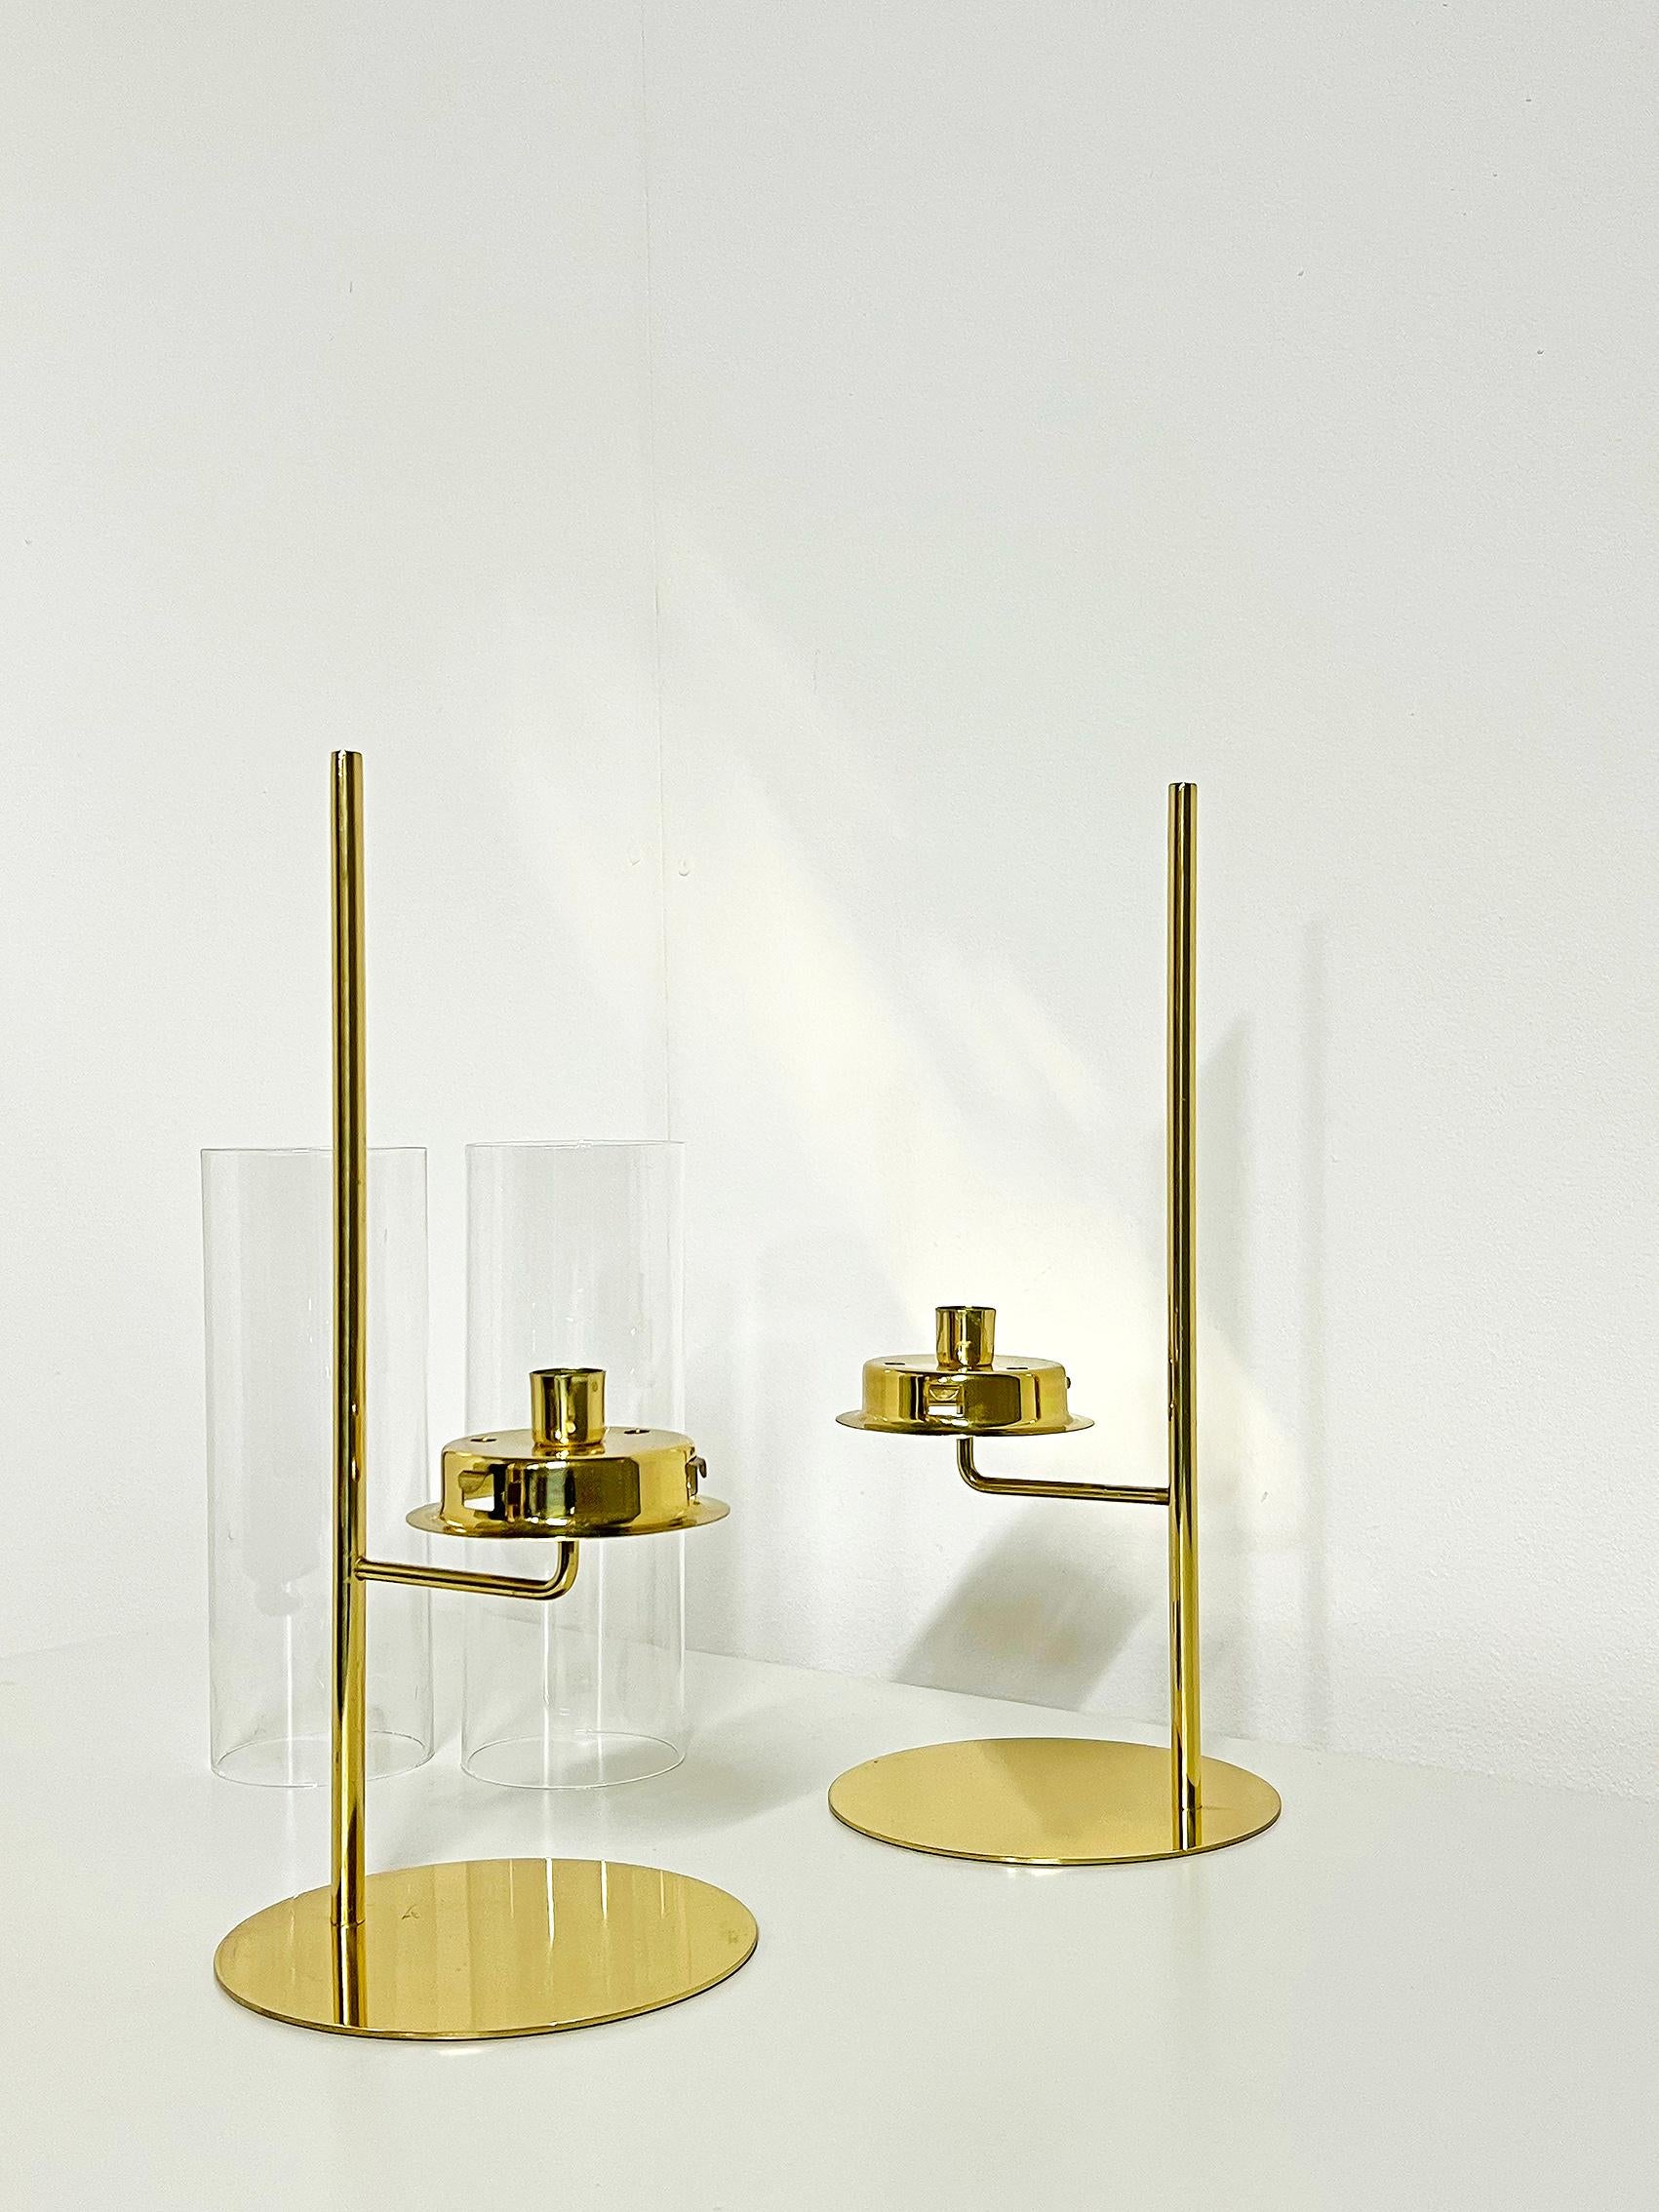 20th Century Swedish Modern Set of 2 Candle Holders by Hans-Agne Jakobsson Model L 191  For Sale